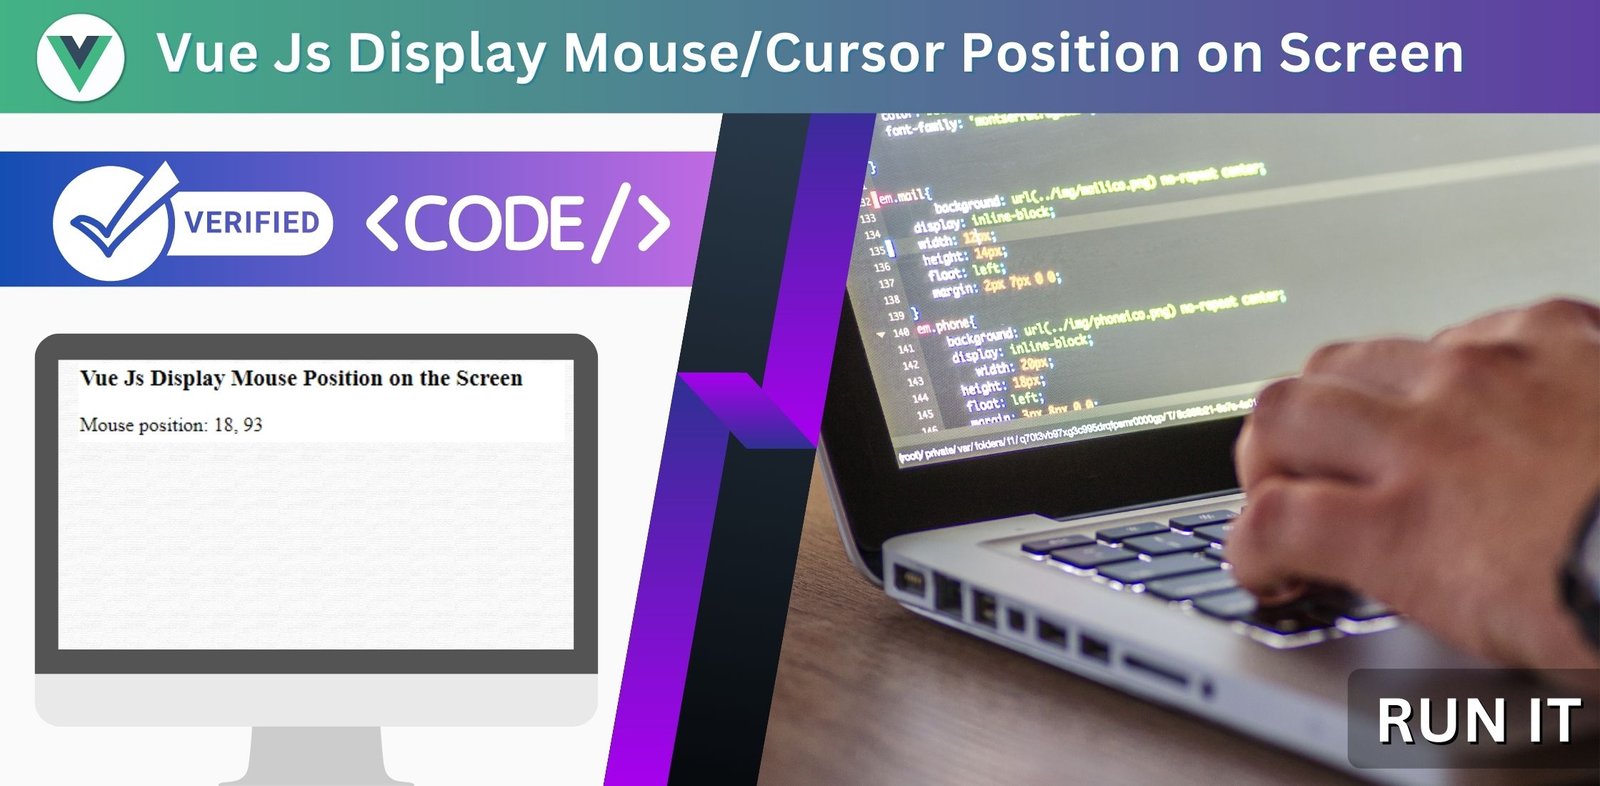 Vue Js Display Mouse/Cursor Position on Screen